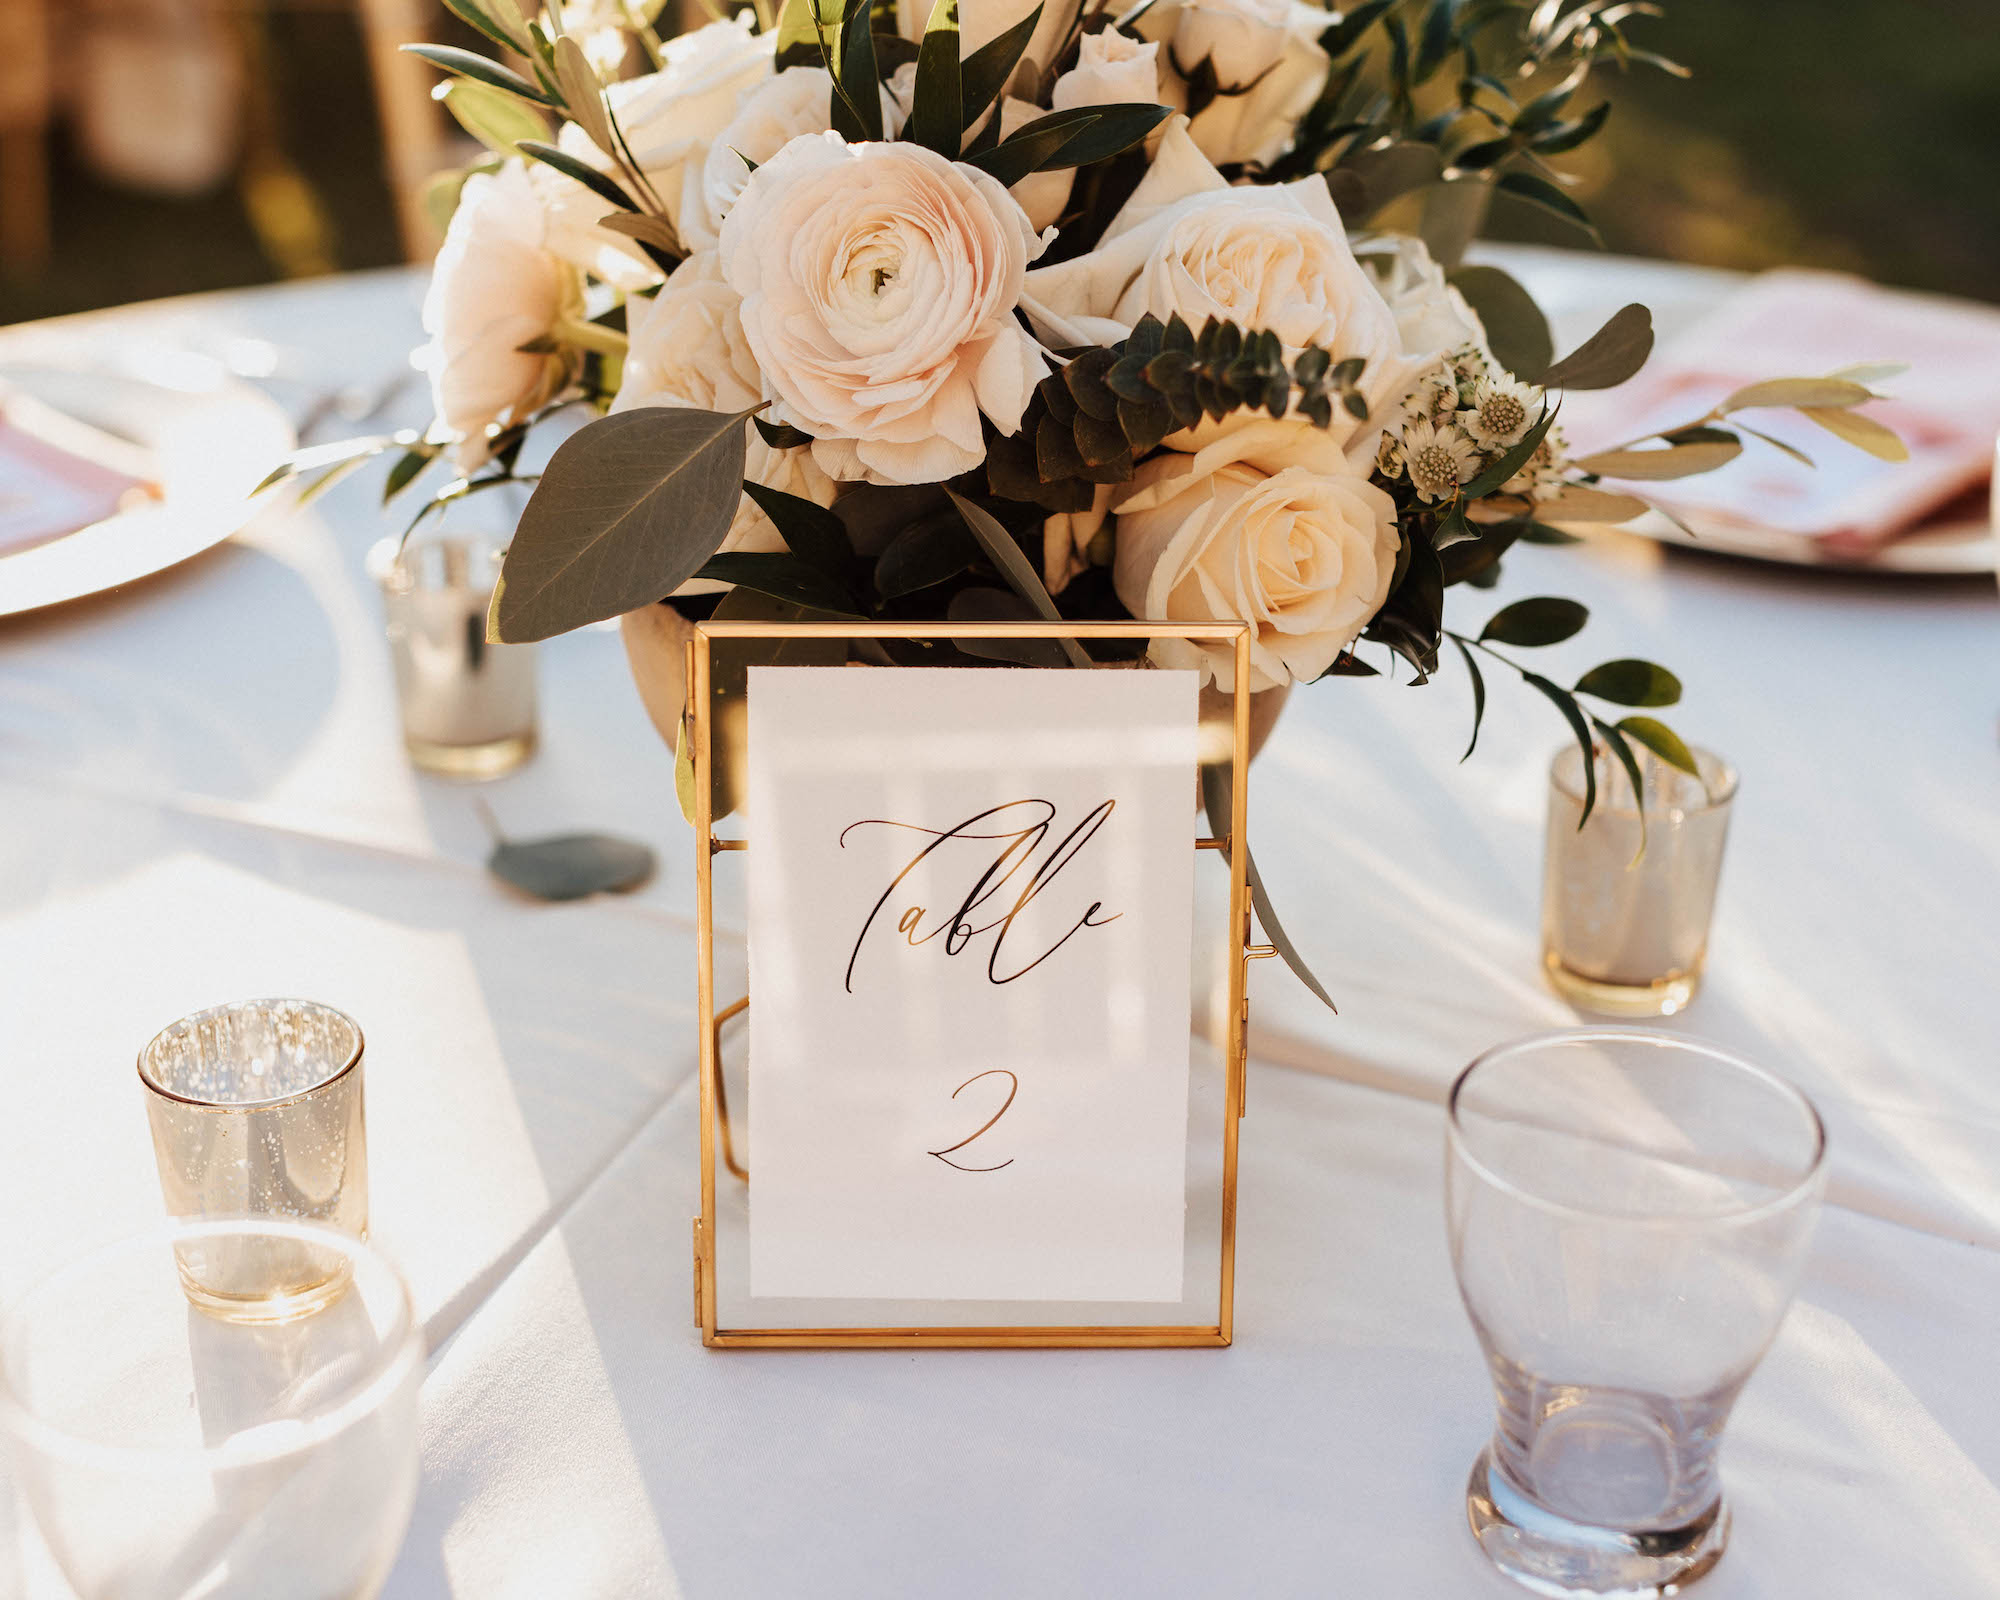 Gold Table Number with White Backing and Floral and Greenery Tablescape Centerpieces